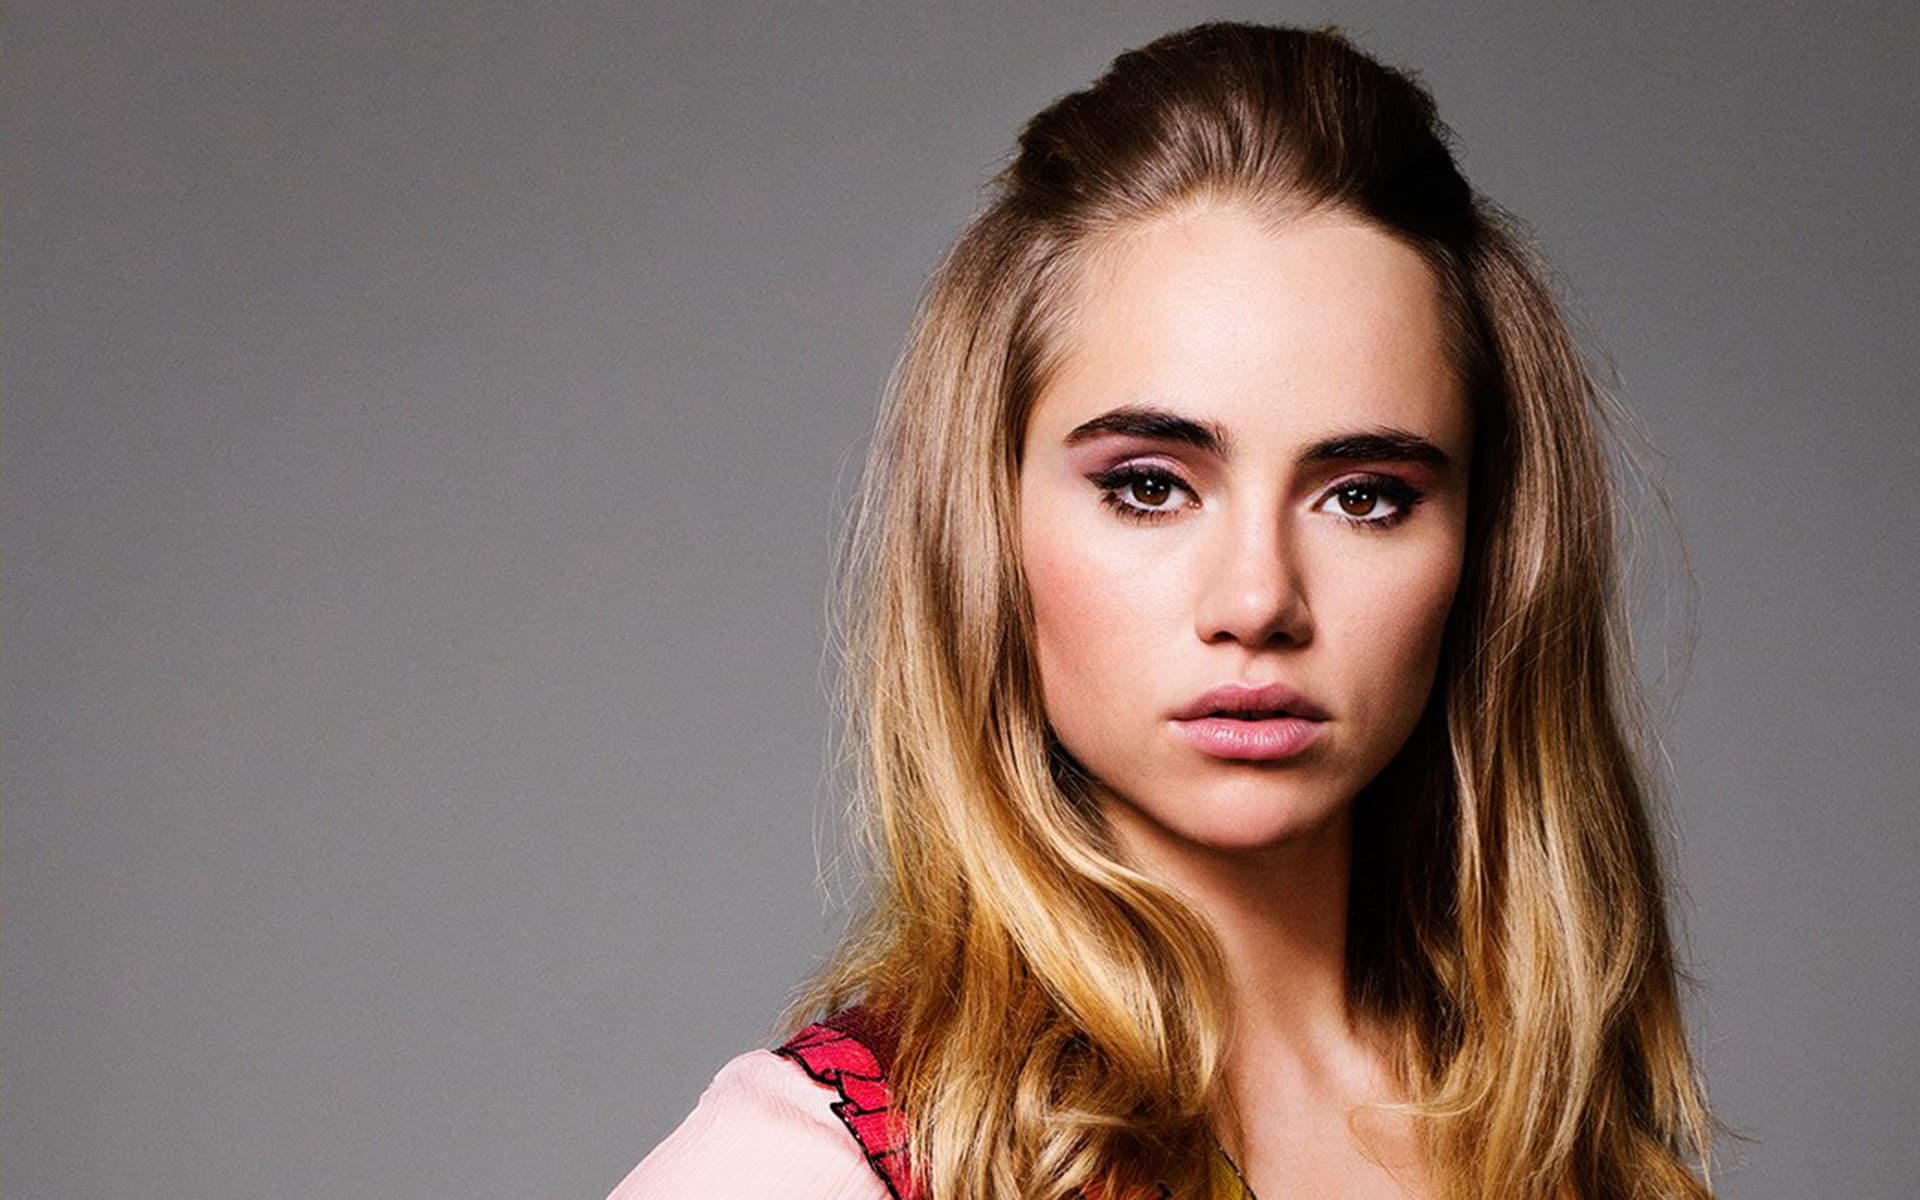 Suki Waterhouse Wallpapers HD Image, Pictures and Photos.